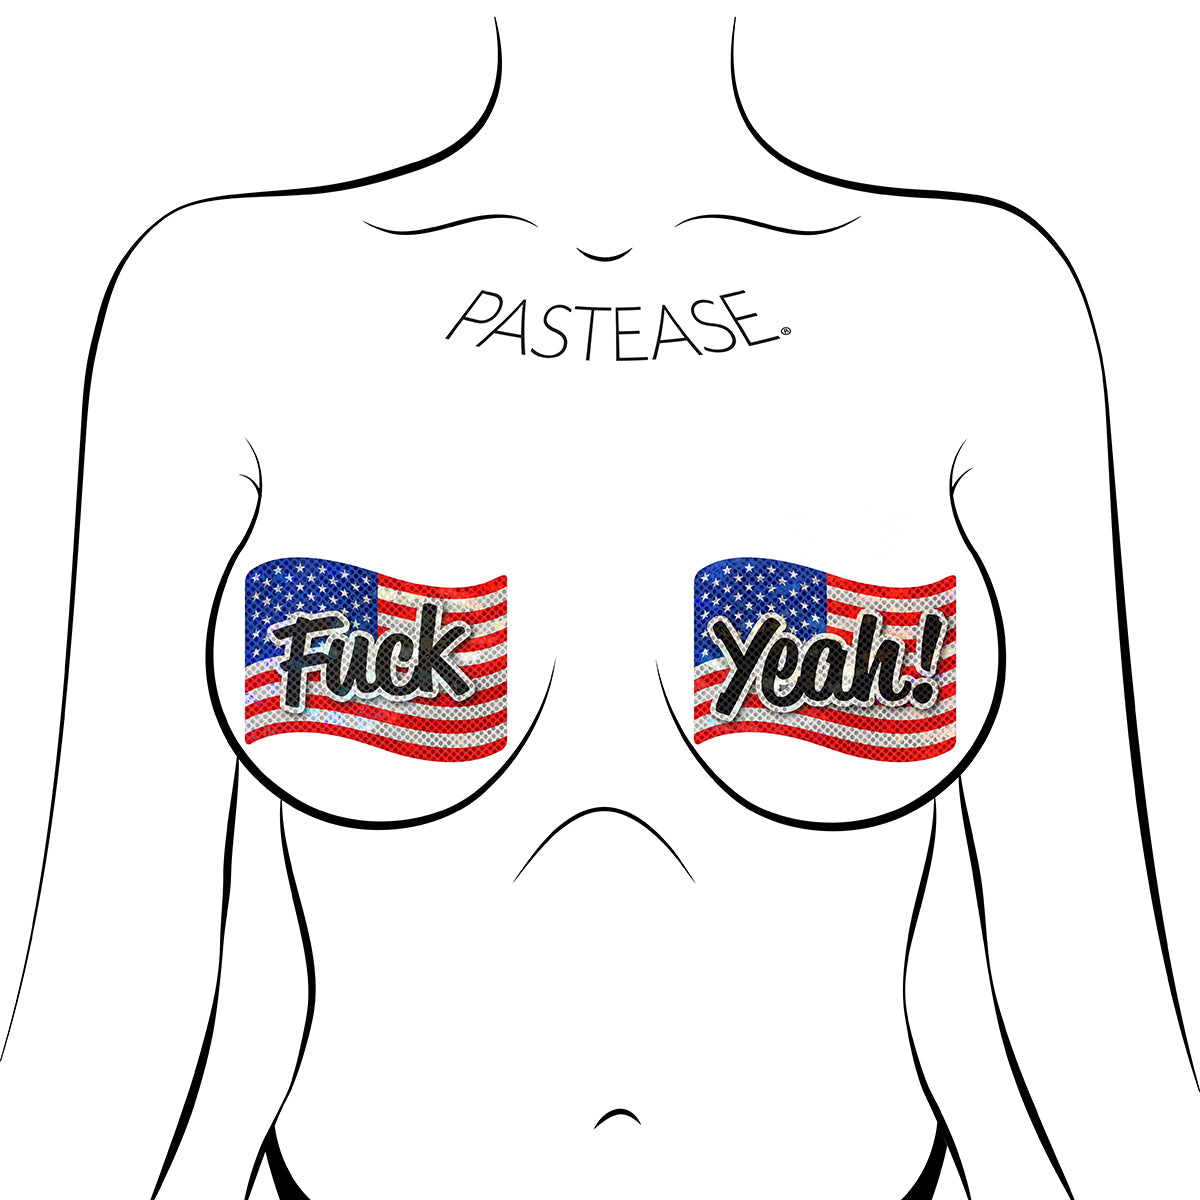 Pastease Fuck Yeah Flags Intimates Adult Boutique